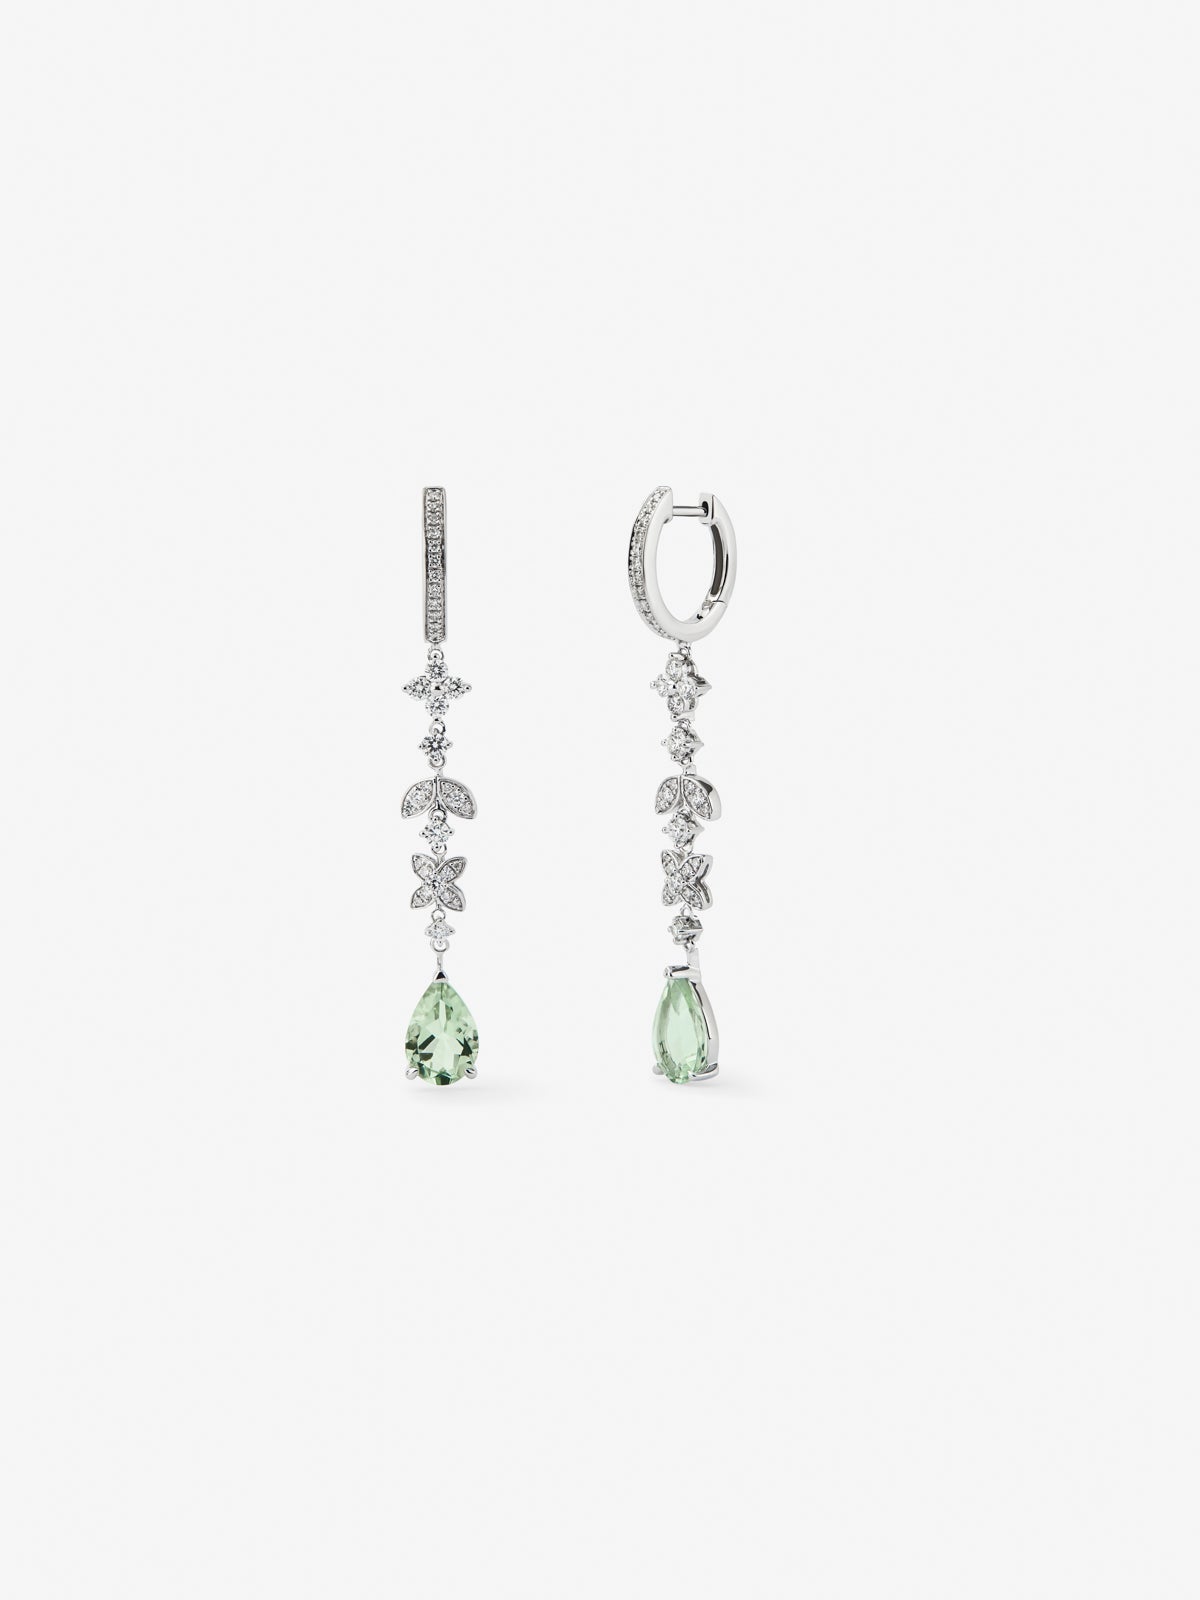 18K white gold earrings with 64 brilliant-cut diamonds with a total of 0.64 cts and 2 pear-cut green amethysts